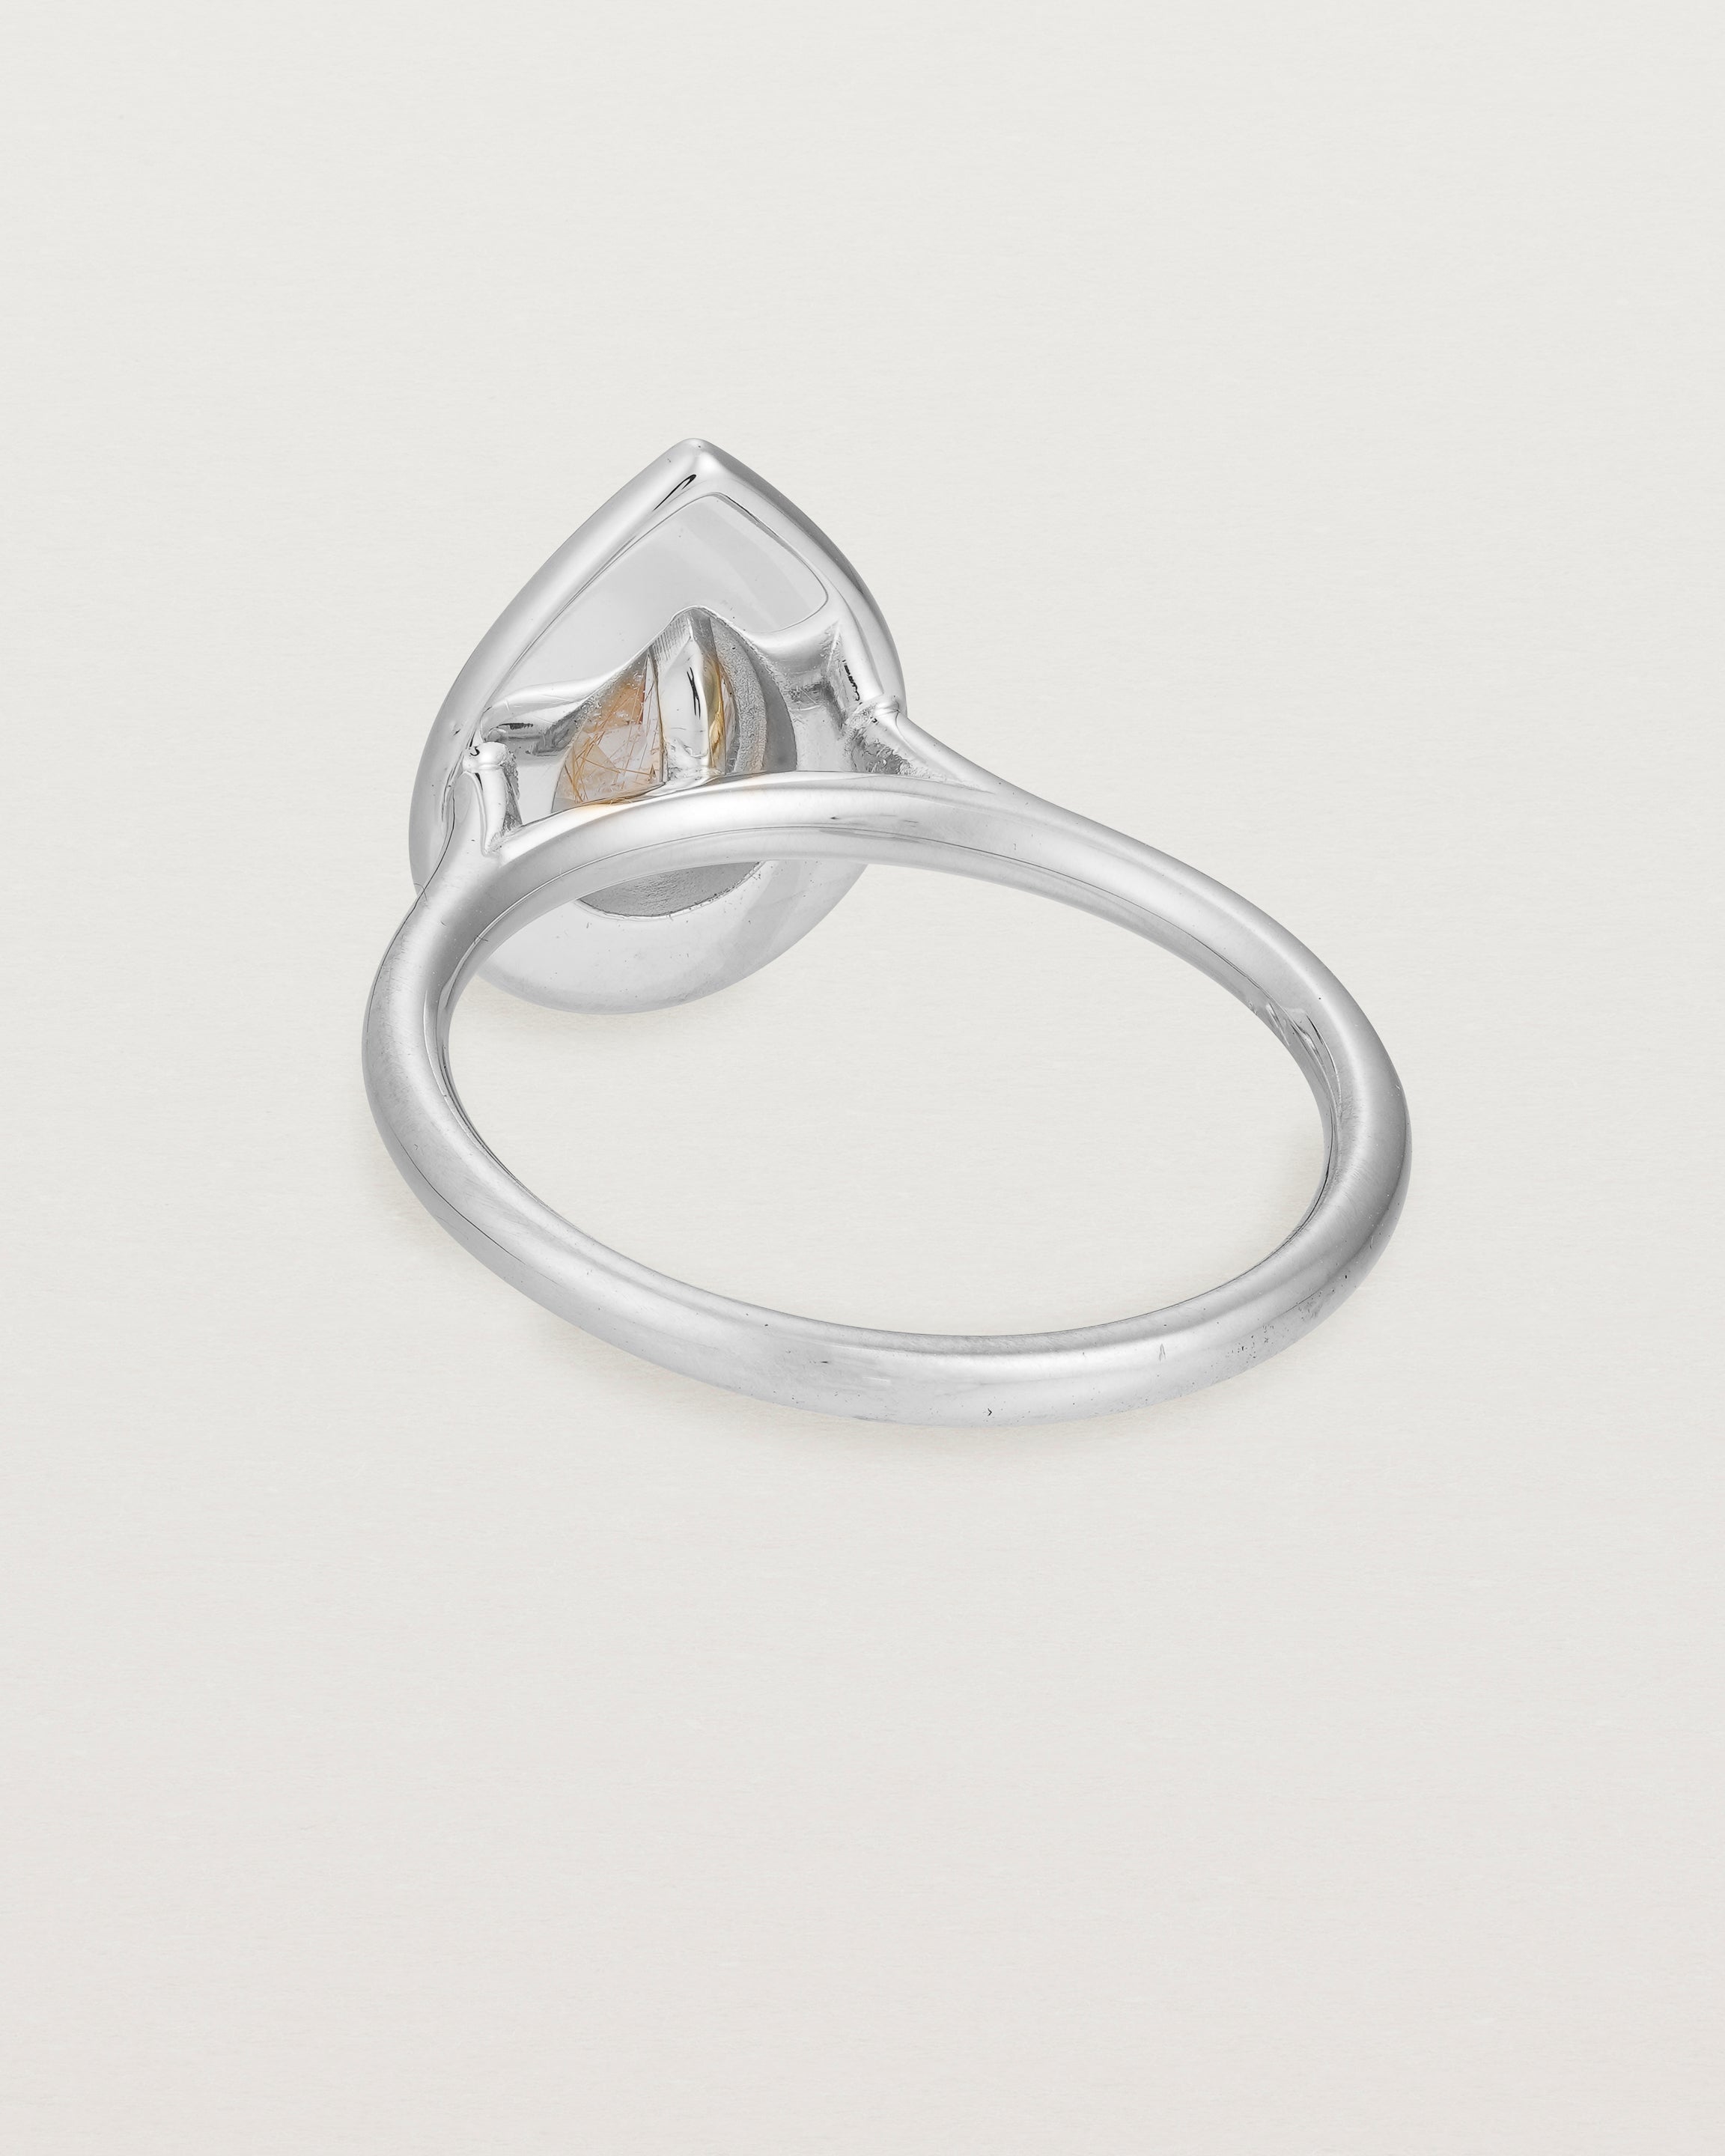 Back view pear halo ring featuring a pear cut rutilated quartz stone and a halo of white diamonds in white gold